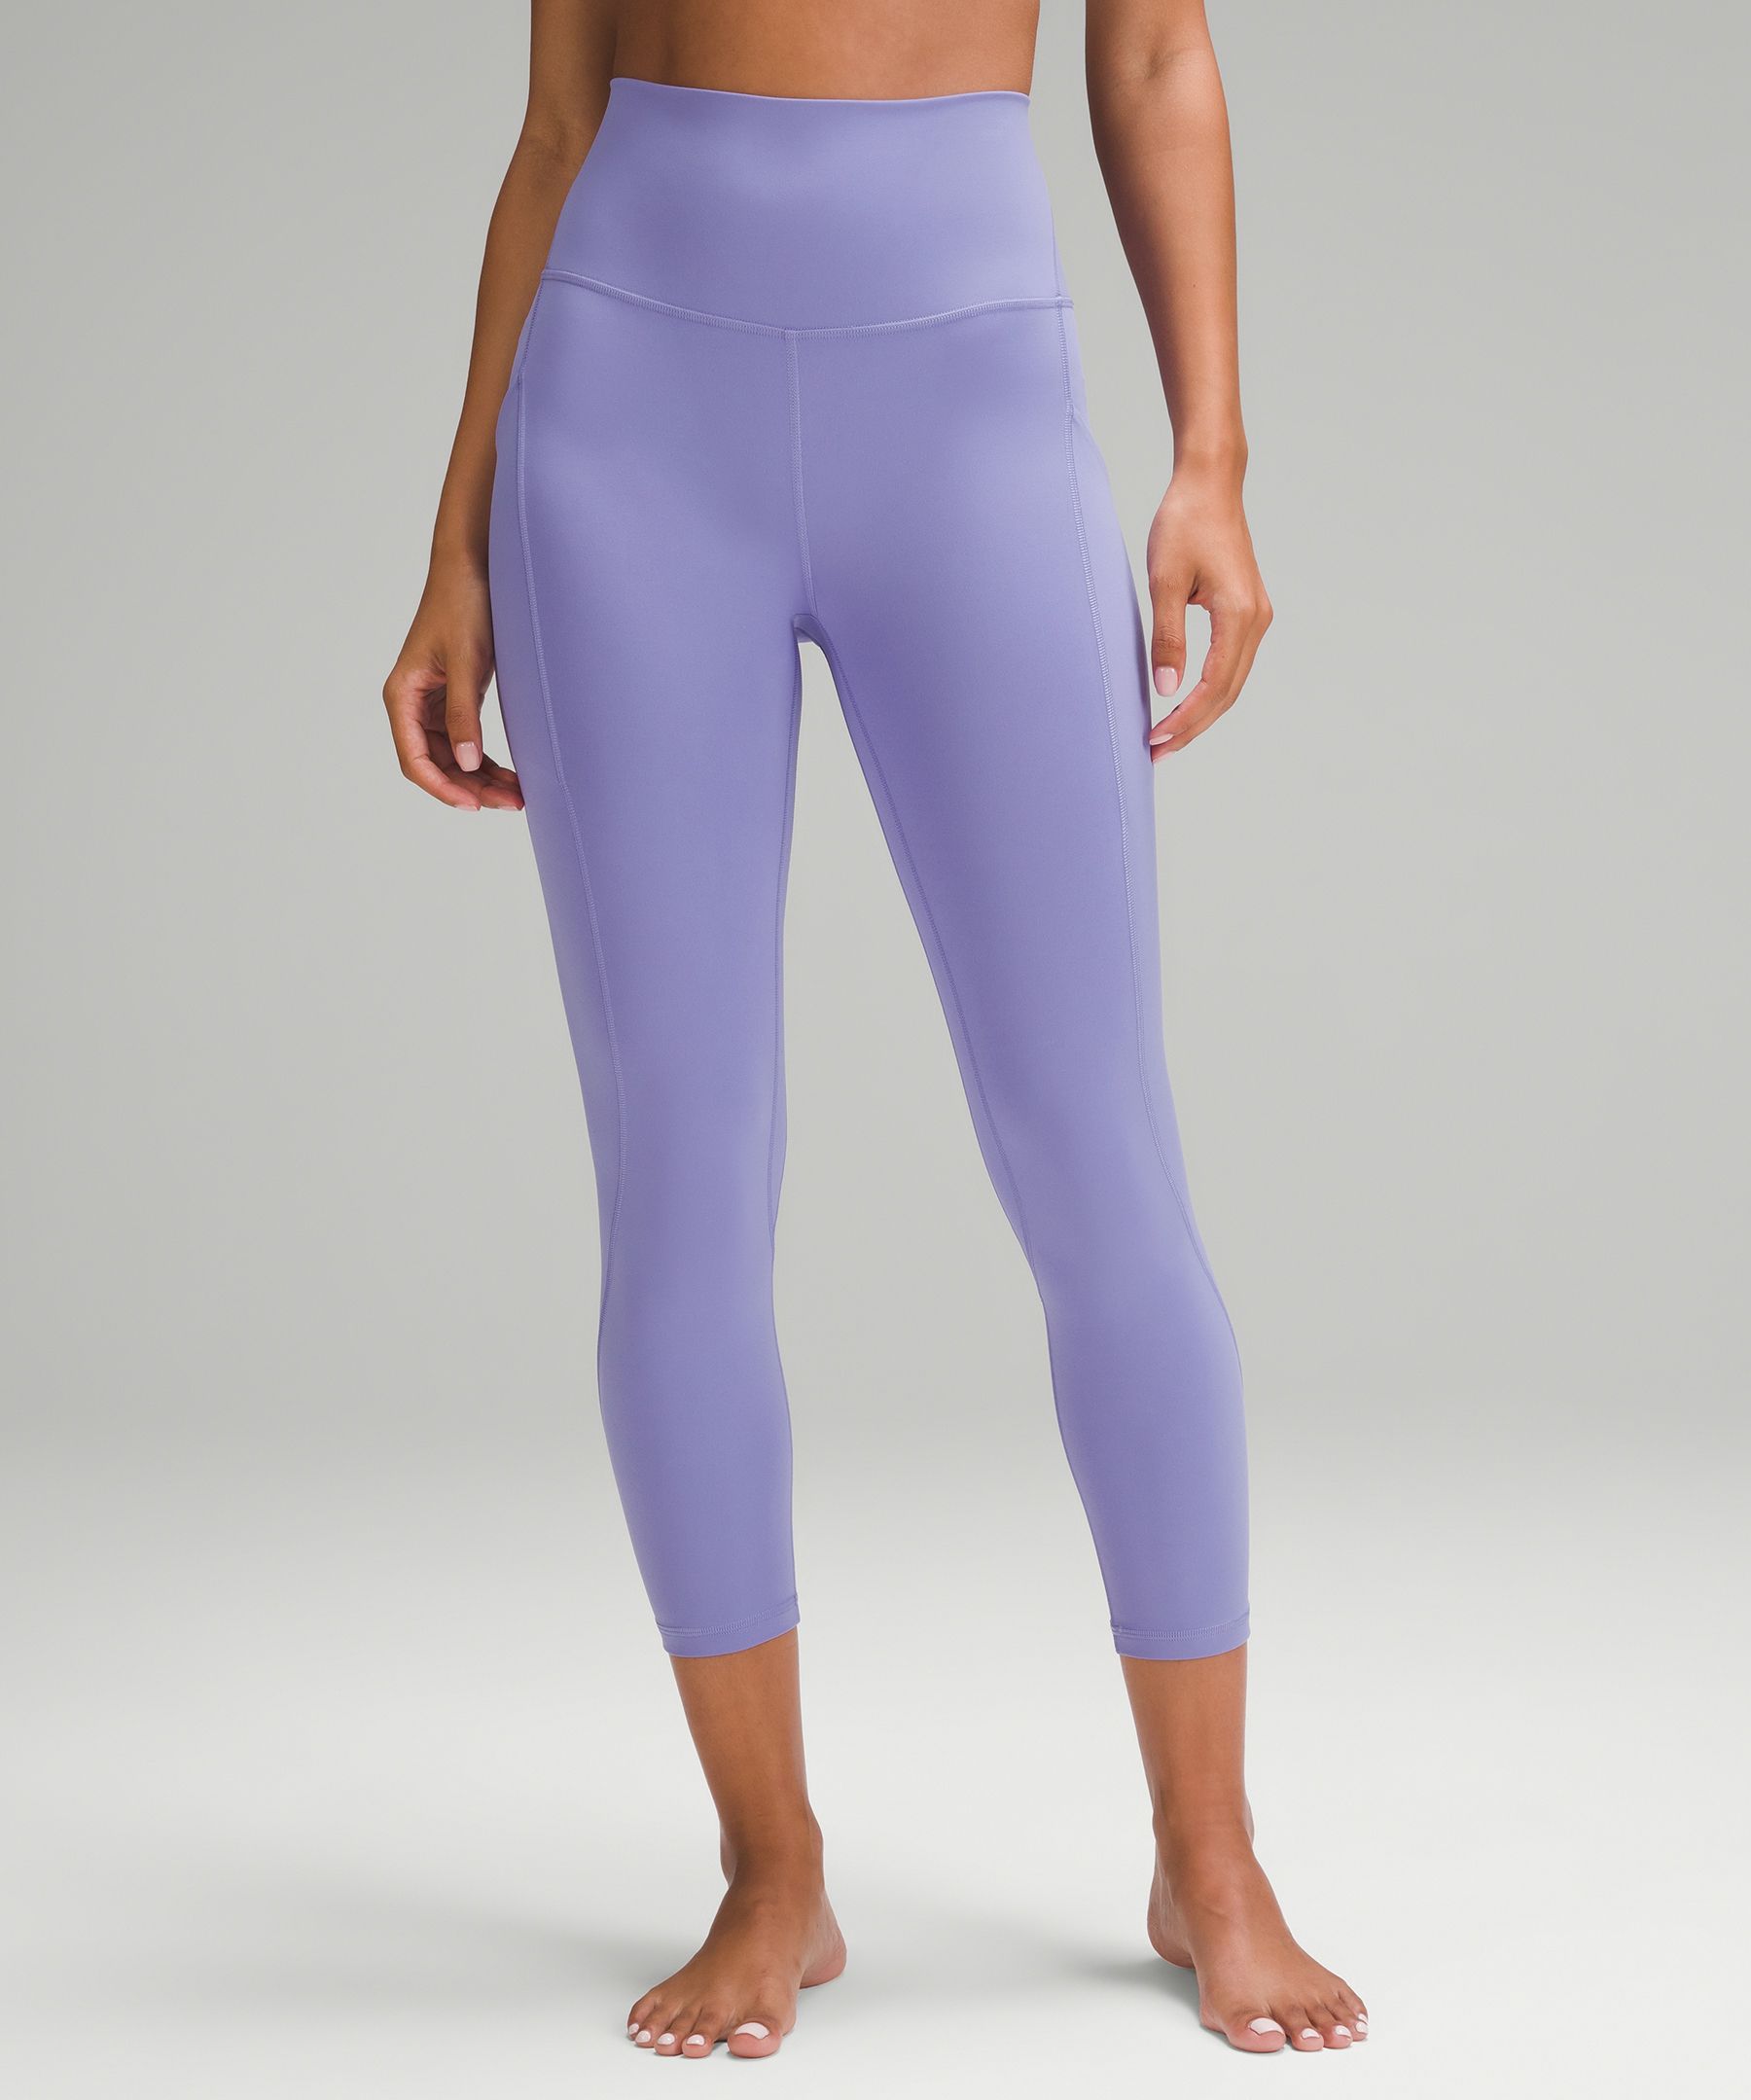 Lululemon Align™ High-rise Crop With Pockets 23"